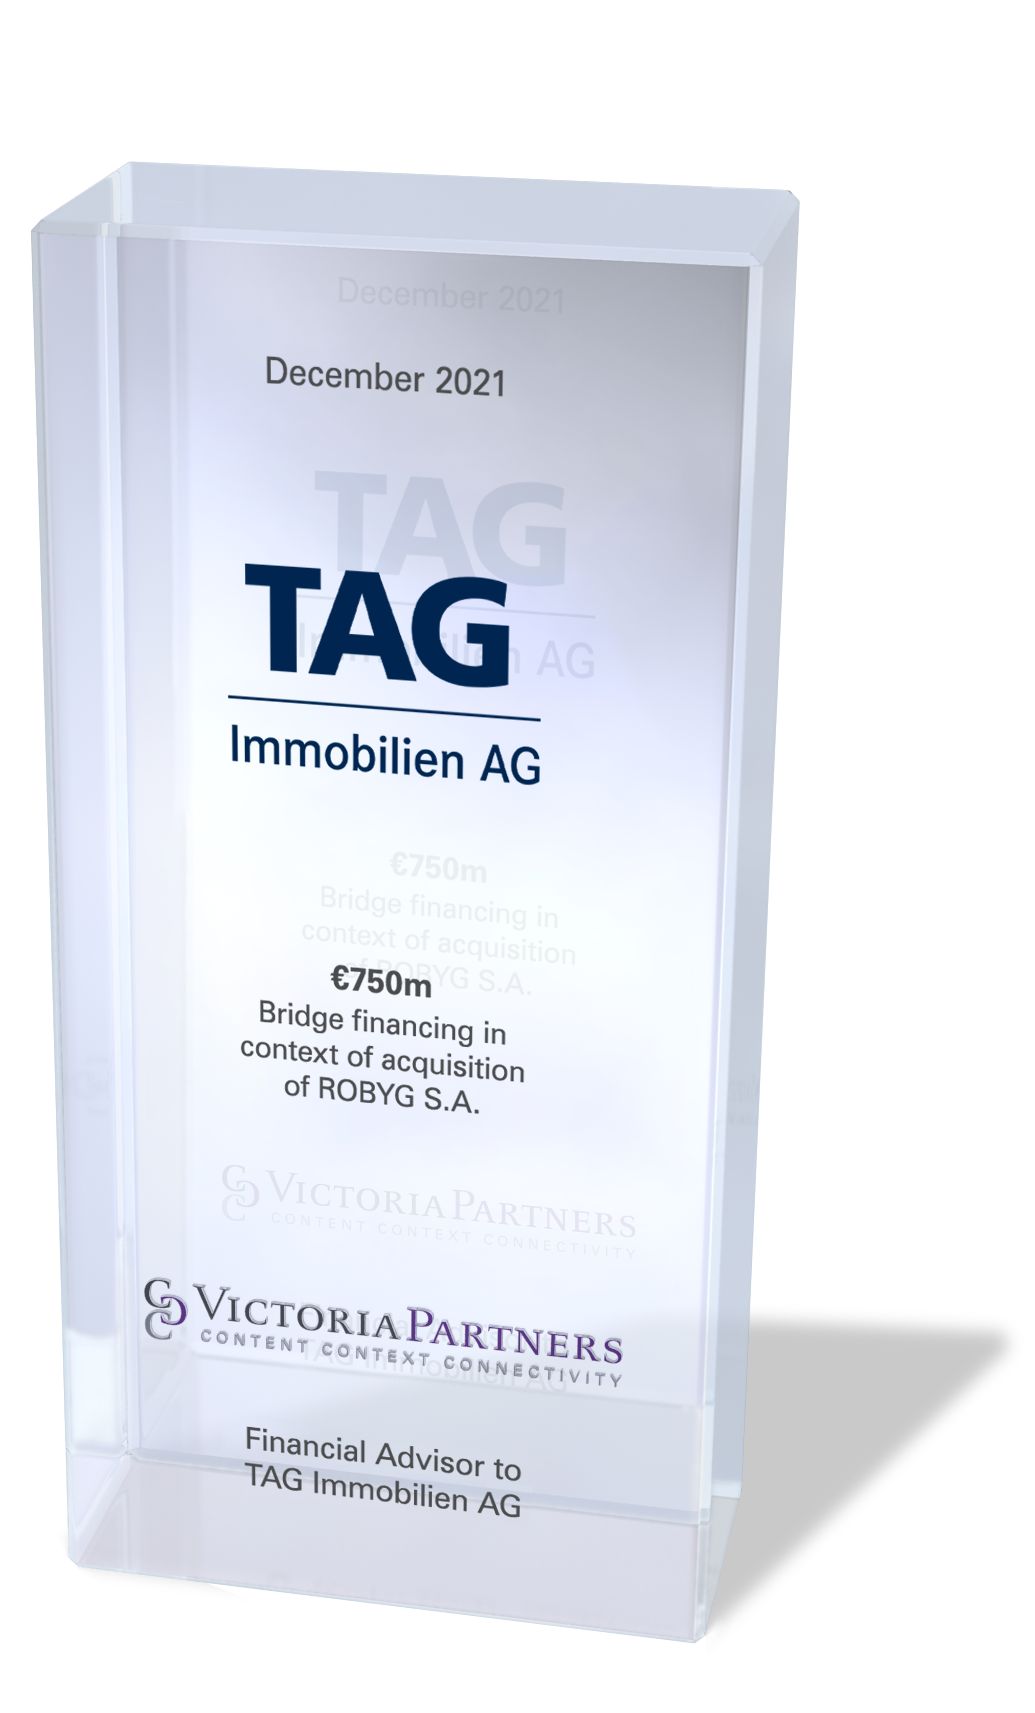 VICTORIAPARTNERS - Financial Advisor to TAG Immobilien AG - December 2021